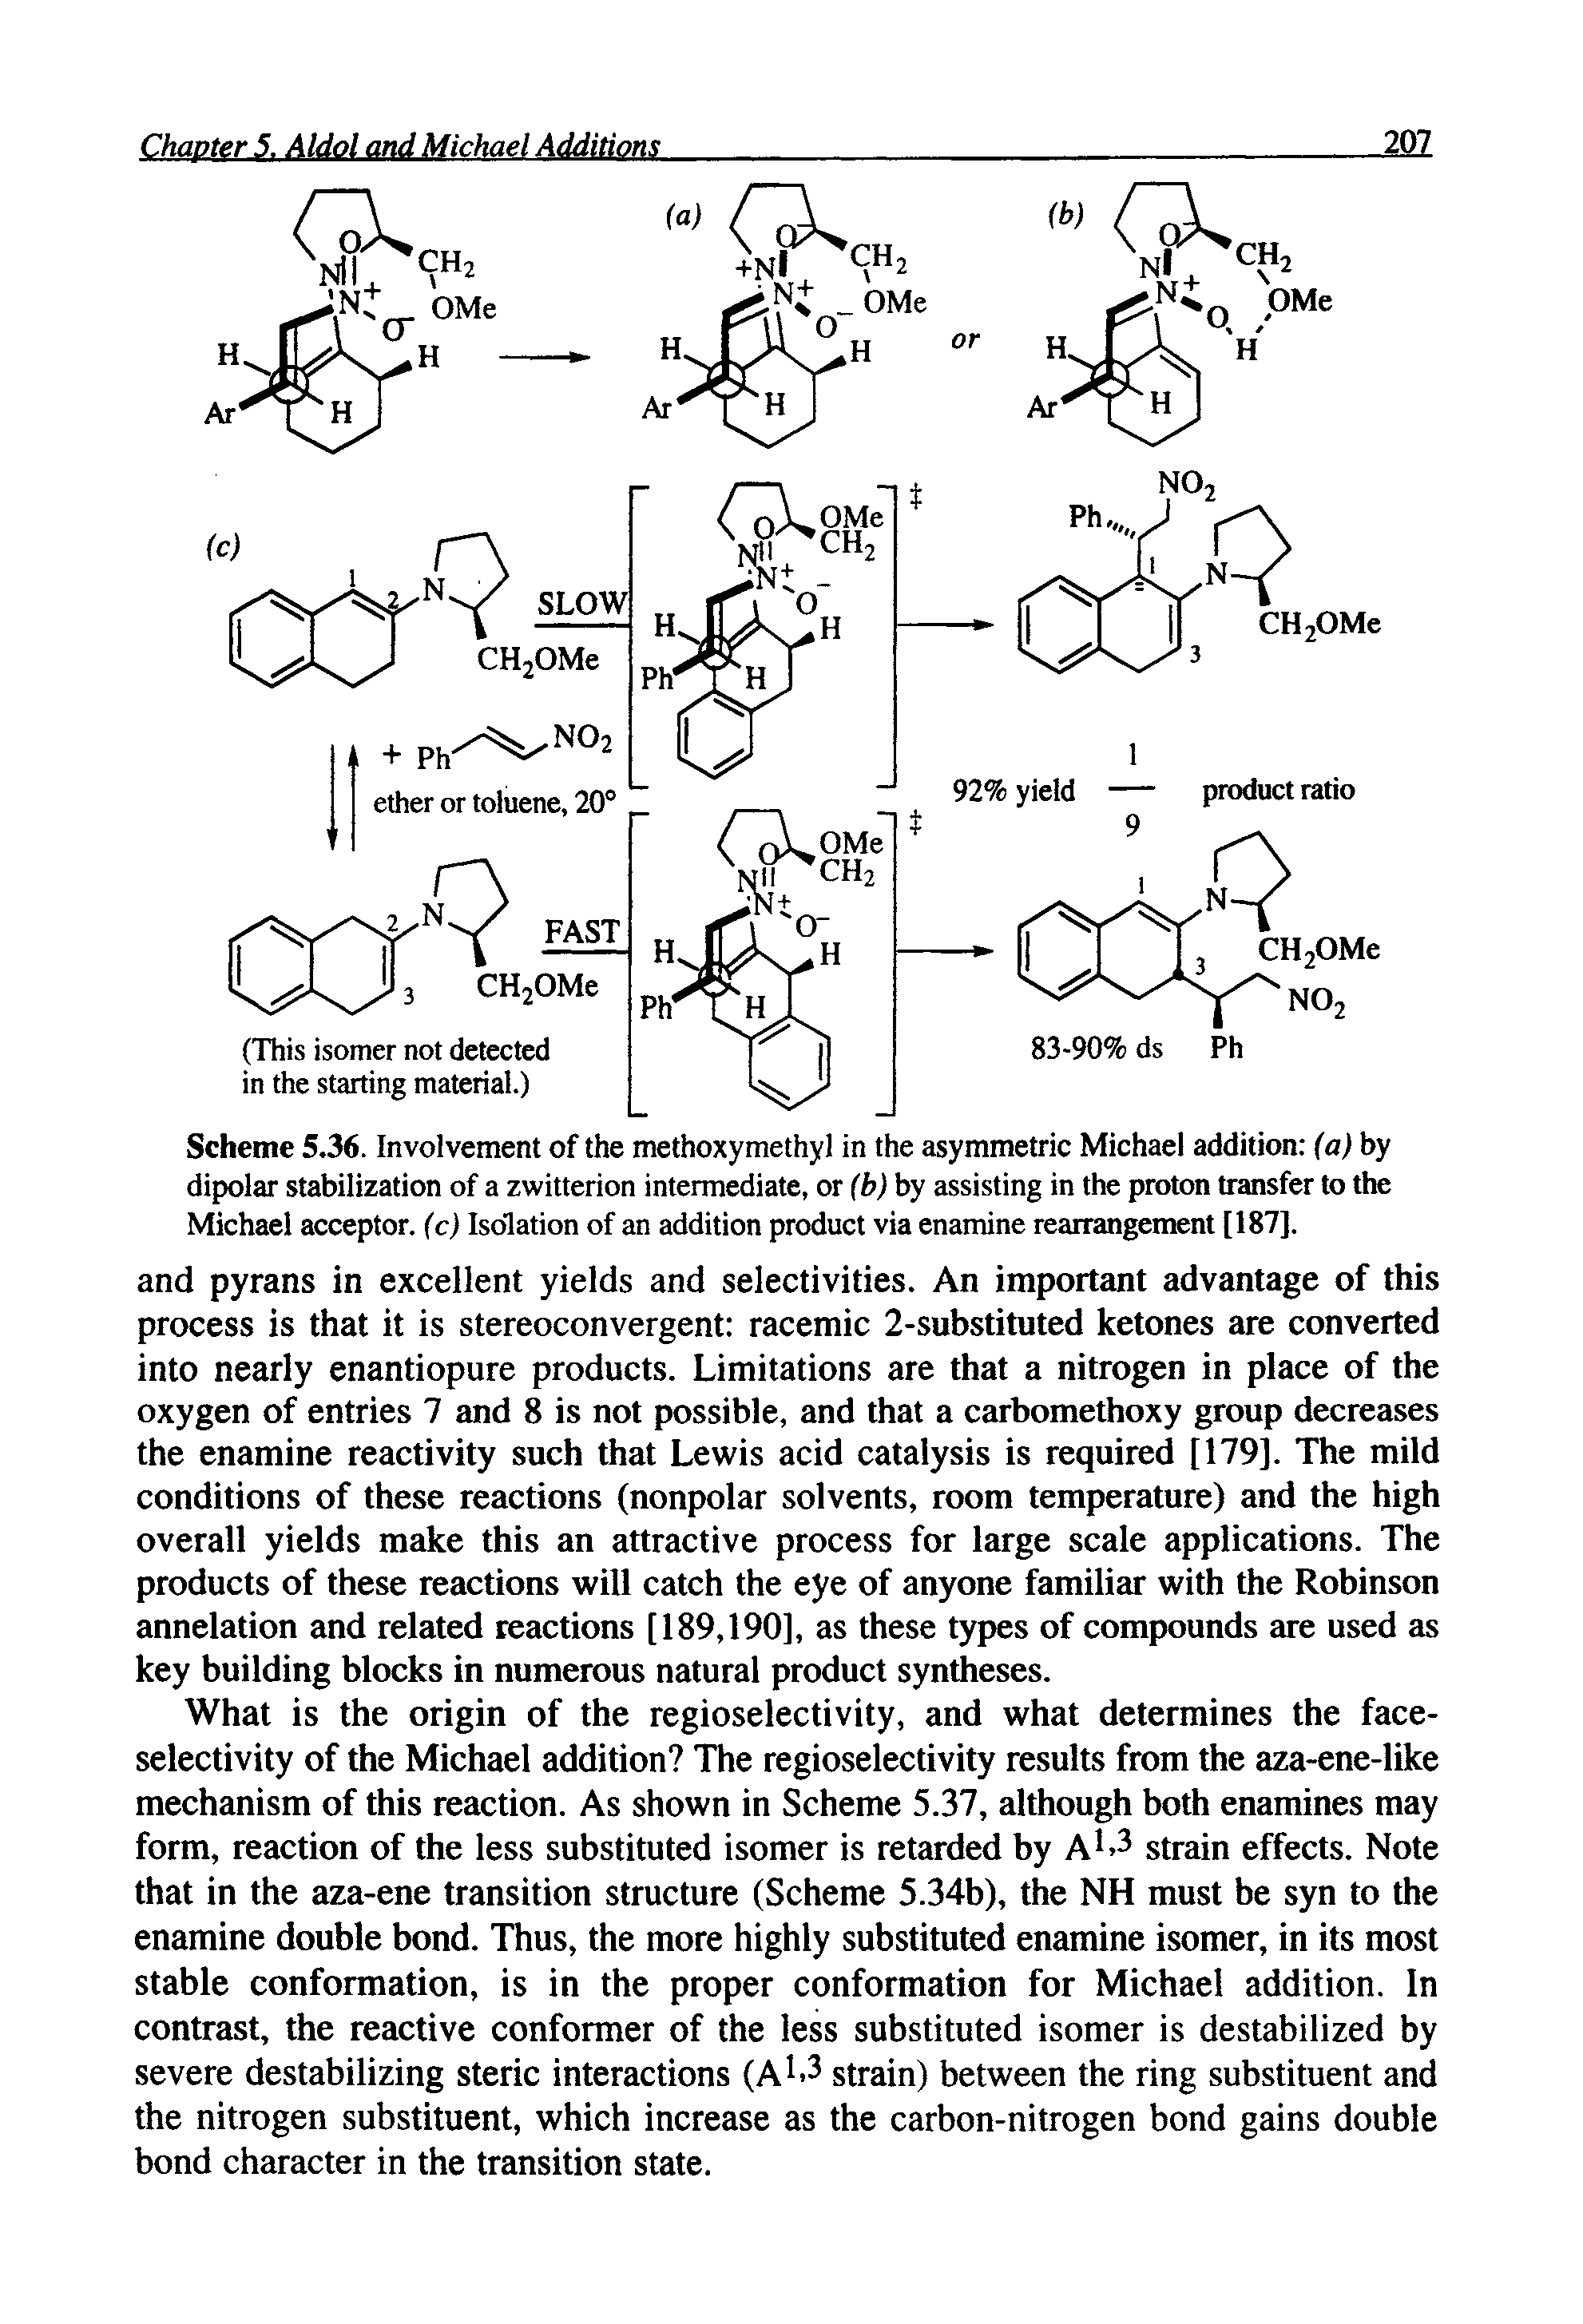 Scheme 5.36. Involvement of the methoxymethyl in the asymmetric Michael addition (a) by dipolar stabilization of a zwitterion intermediate, or (b) by assisting in the proton transfer to the Michael acceptor, (c) Isolation of an addition product via enamine rearrangement [187].